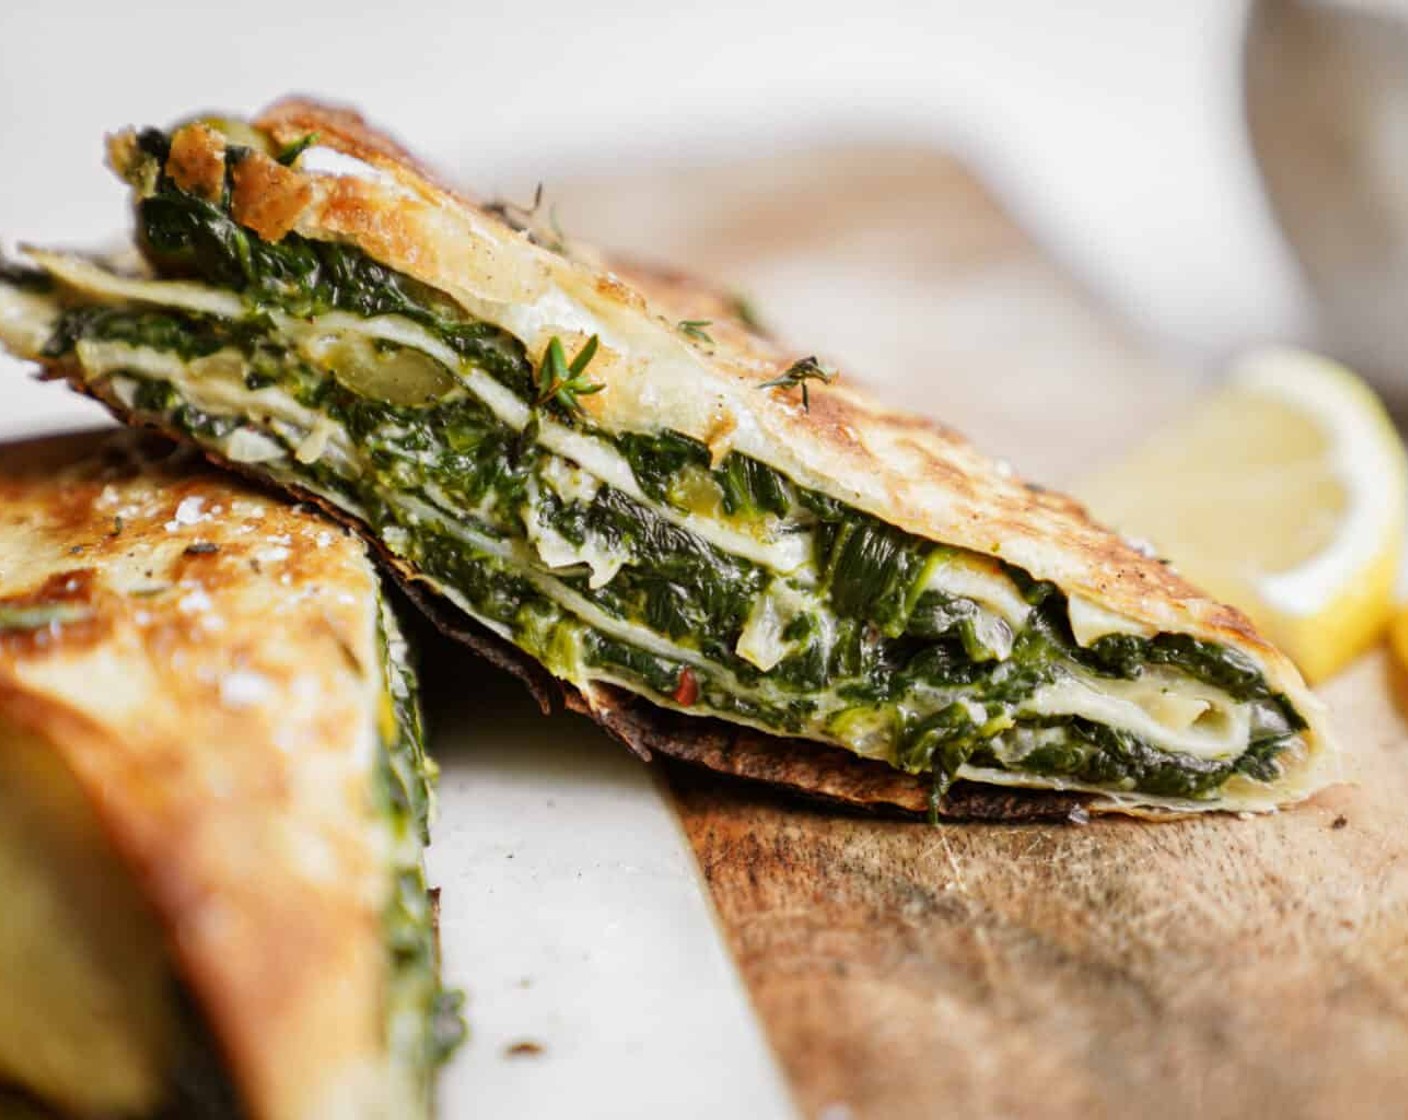 Crunchy Feta, Olive and Spinach Wrap